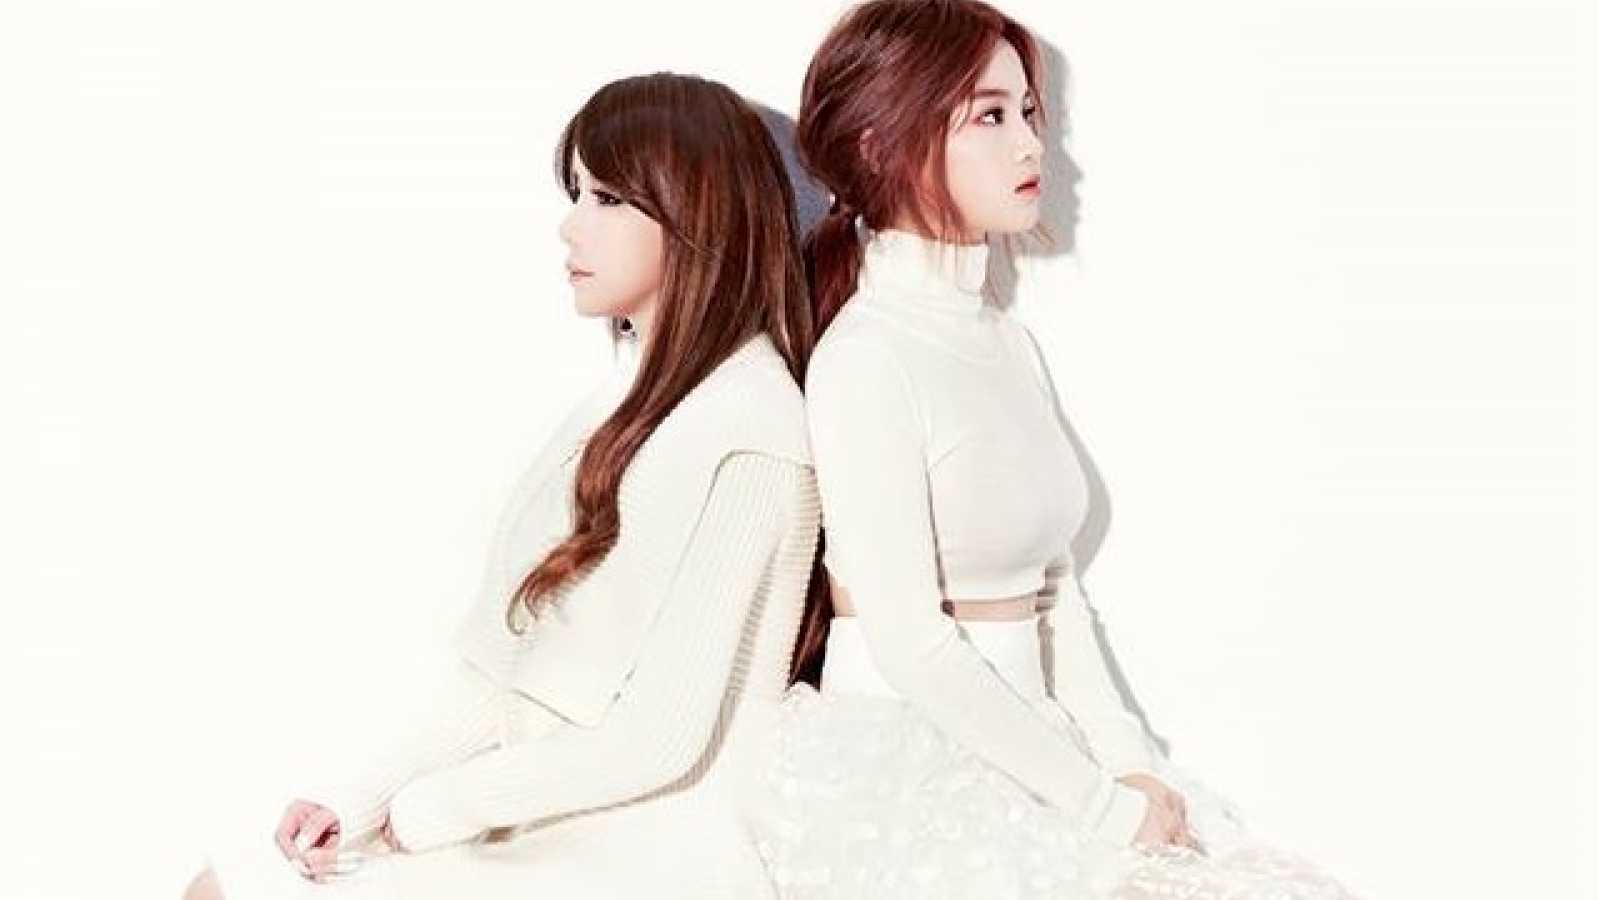 BOM&HI © YG Entertainment. All rights reserved